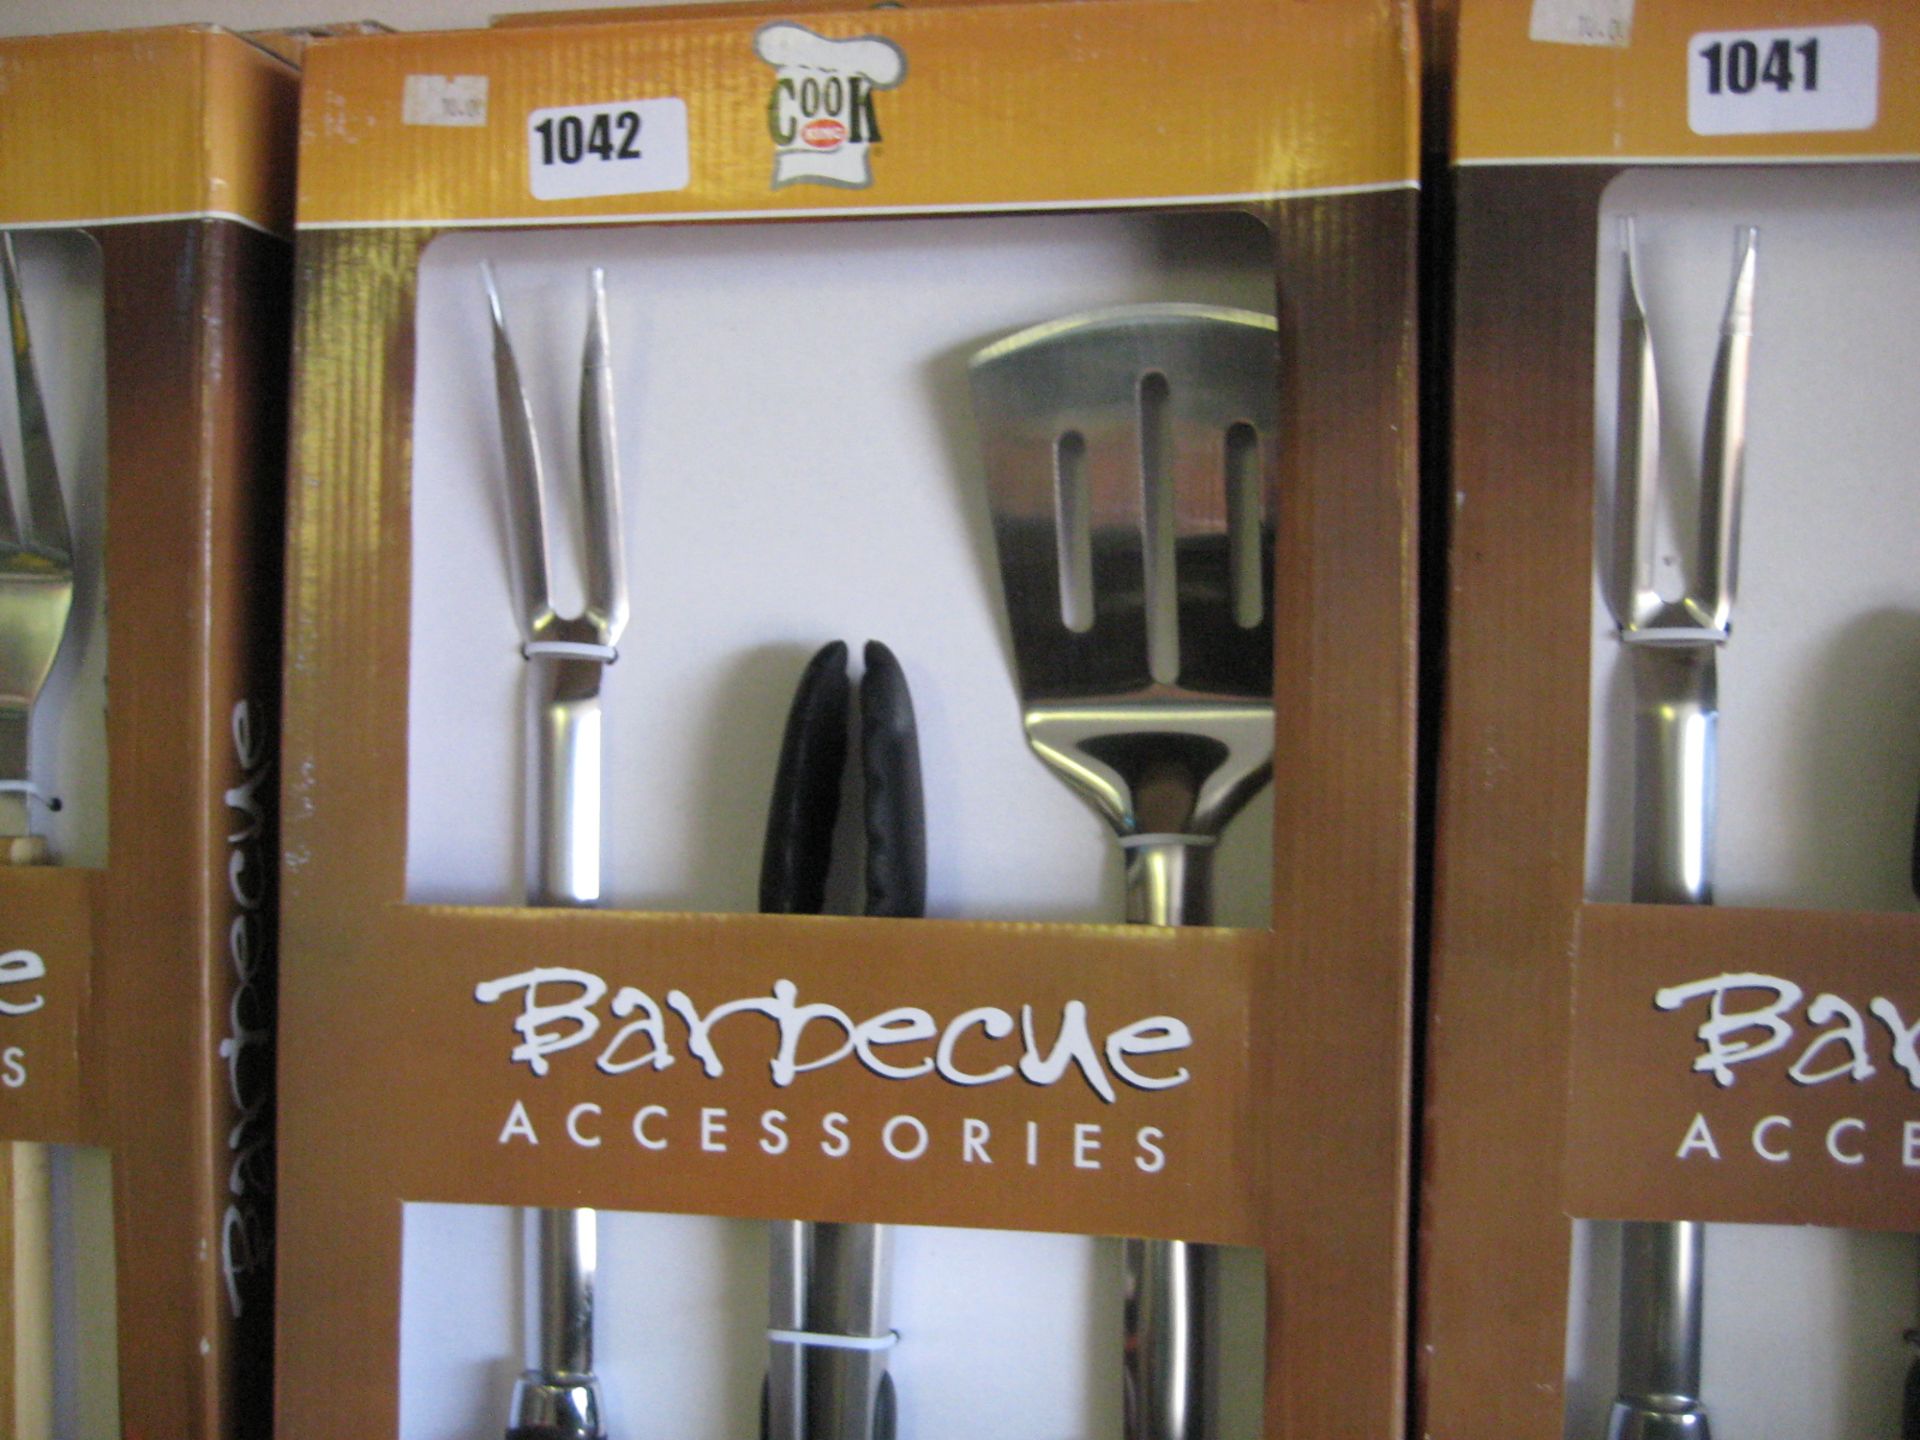 3 boxed BBQ accessories sets